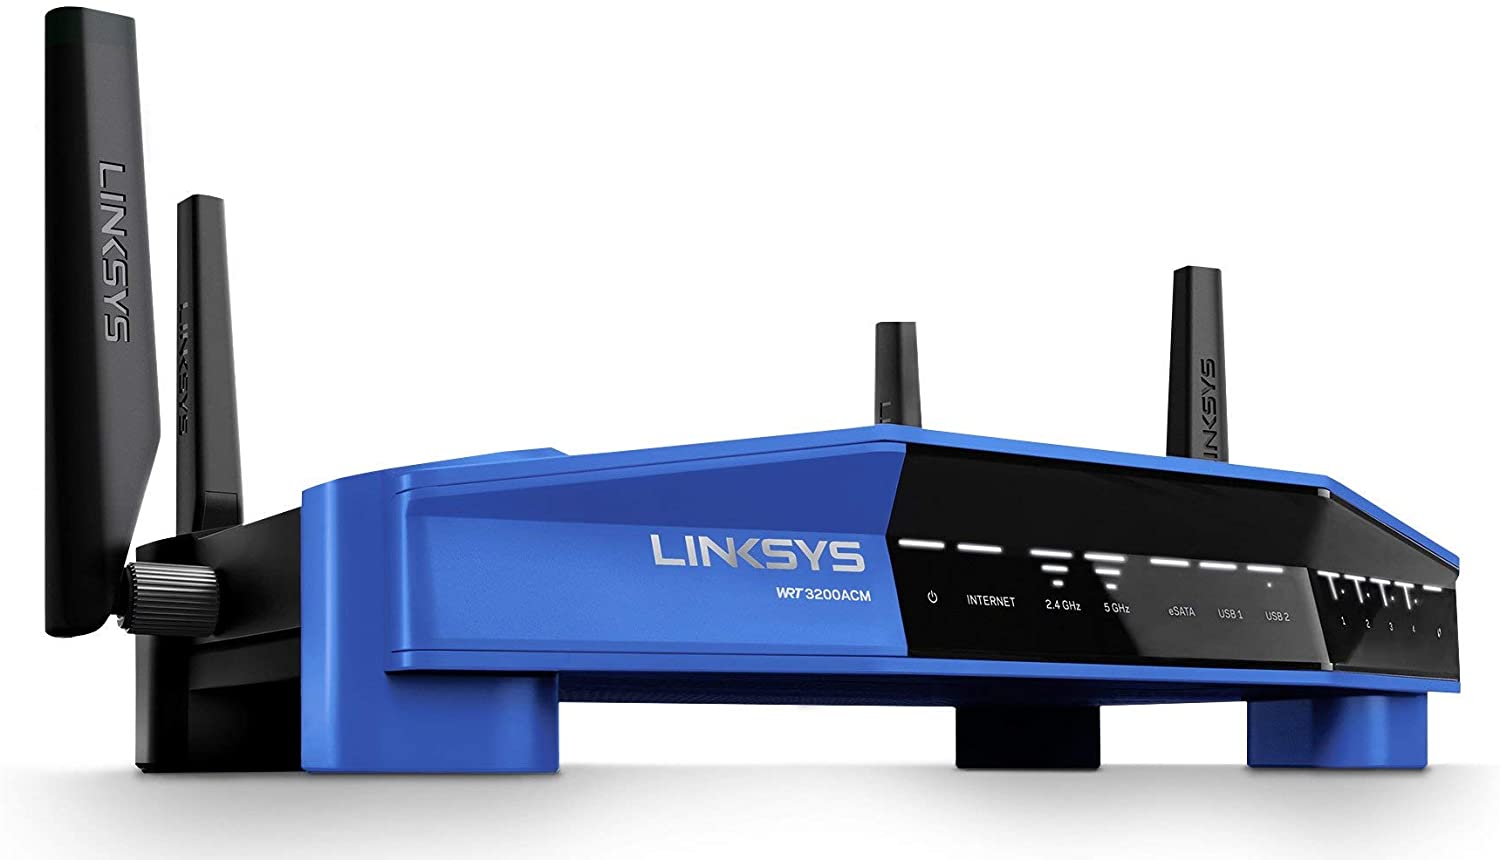 Linksys WRT3200 Router